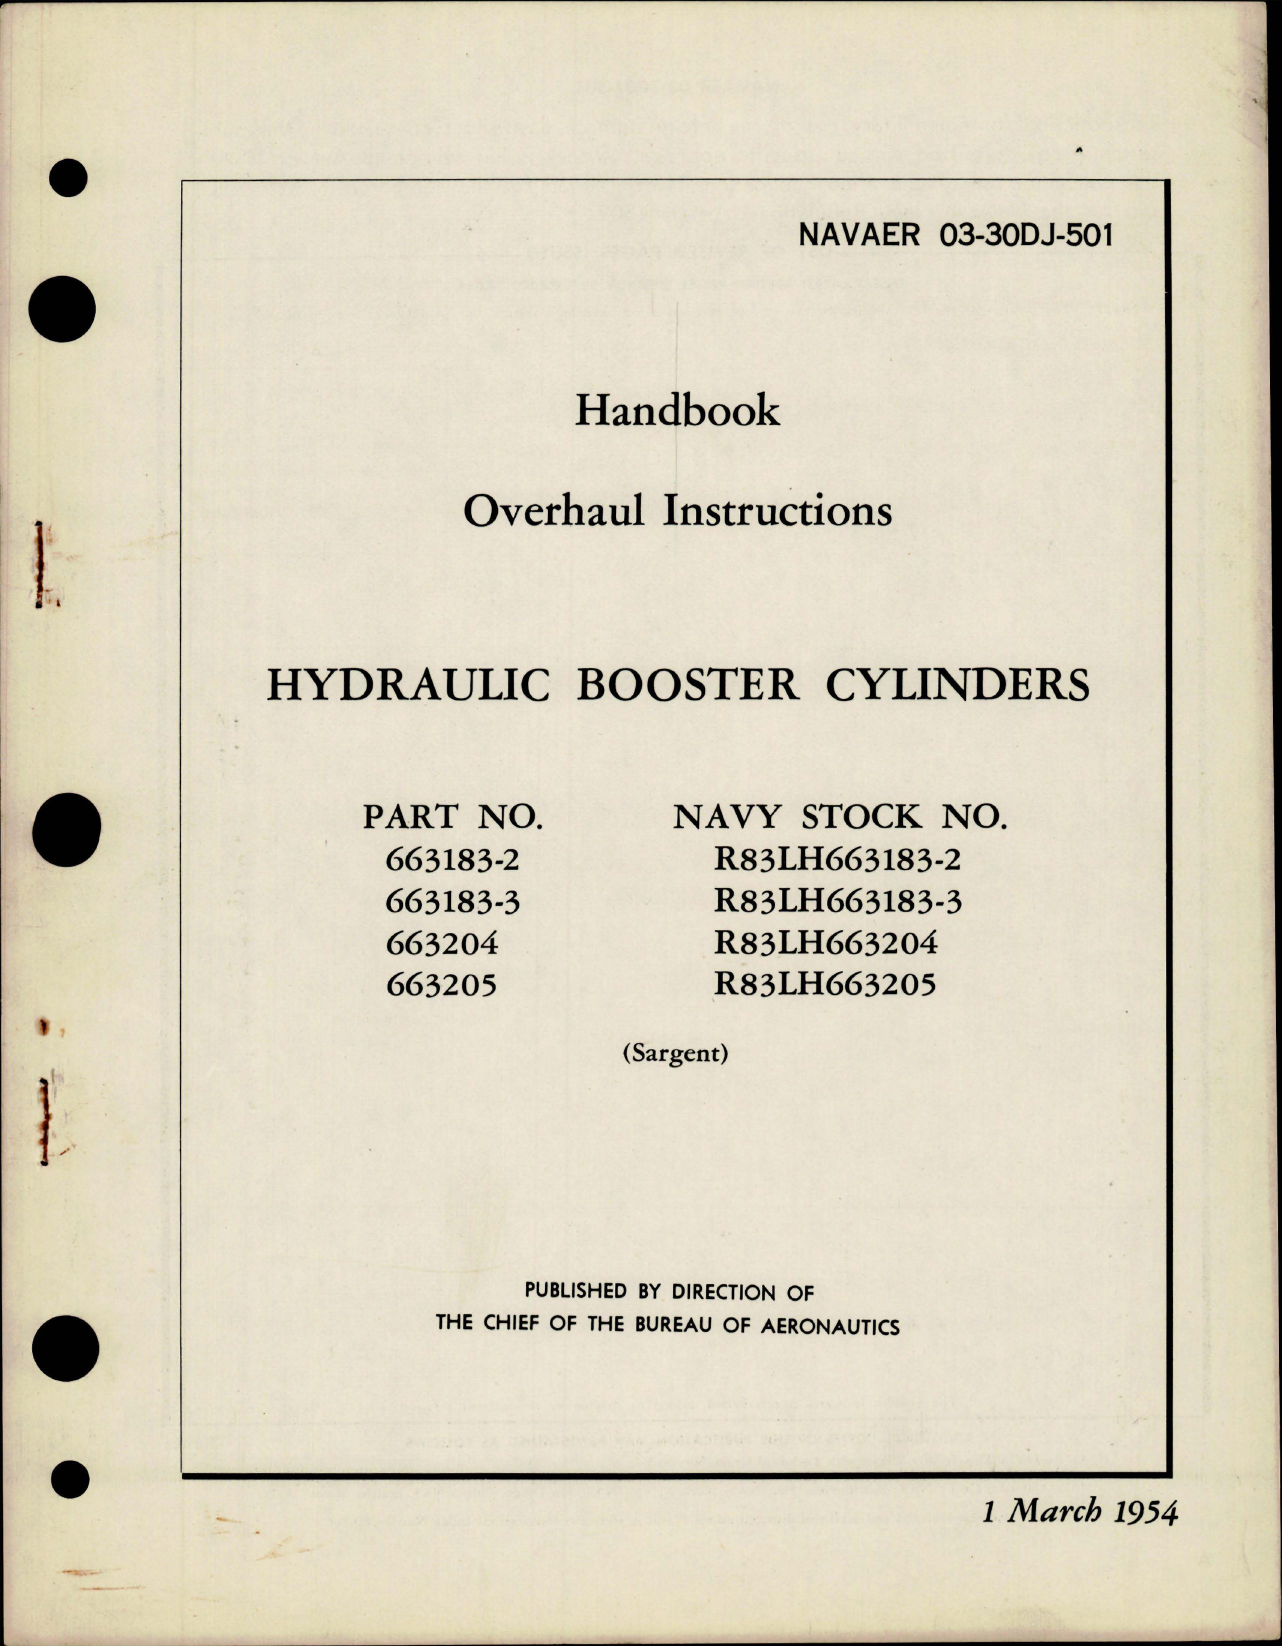 Sample page 1 from AirCorps Library document: Overhaul Instructions for Hydraulic Booster Cylinders - Parts 663183-2, 663183-3, 663204, 663205